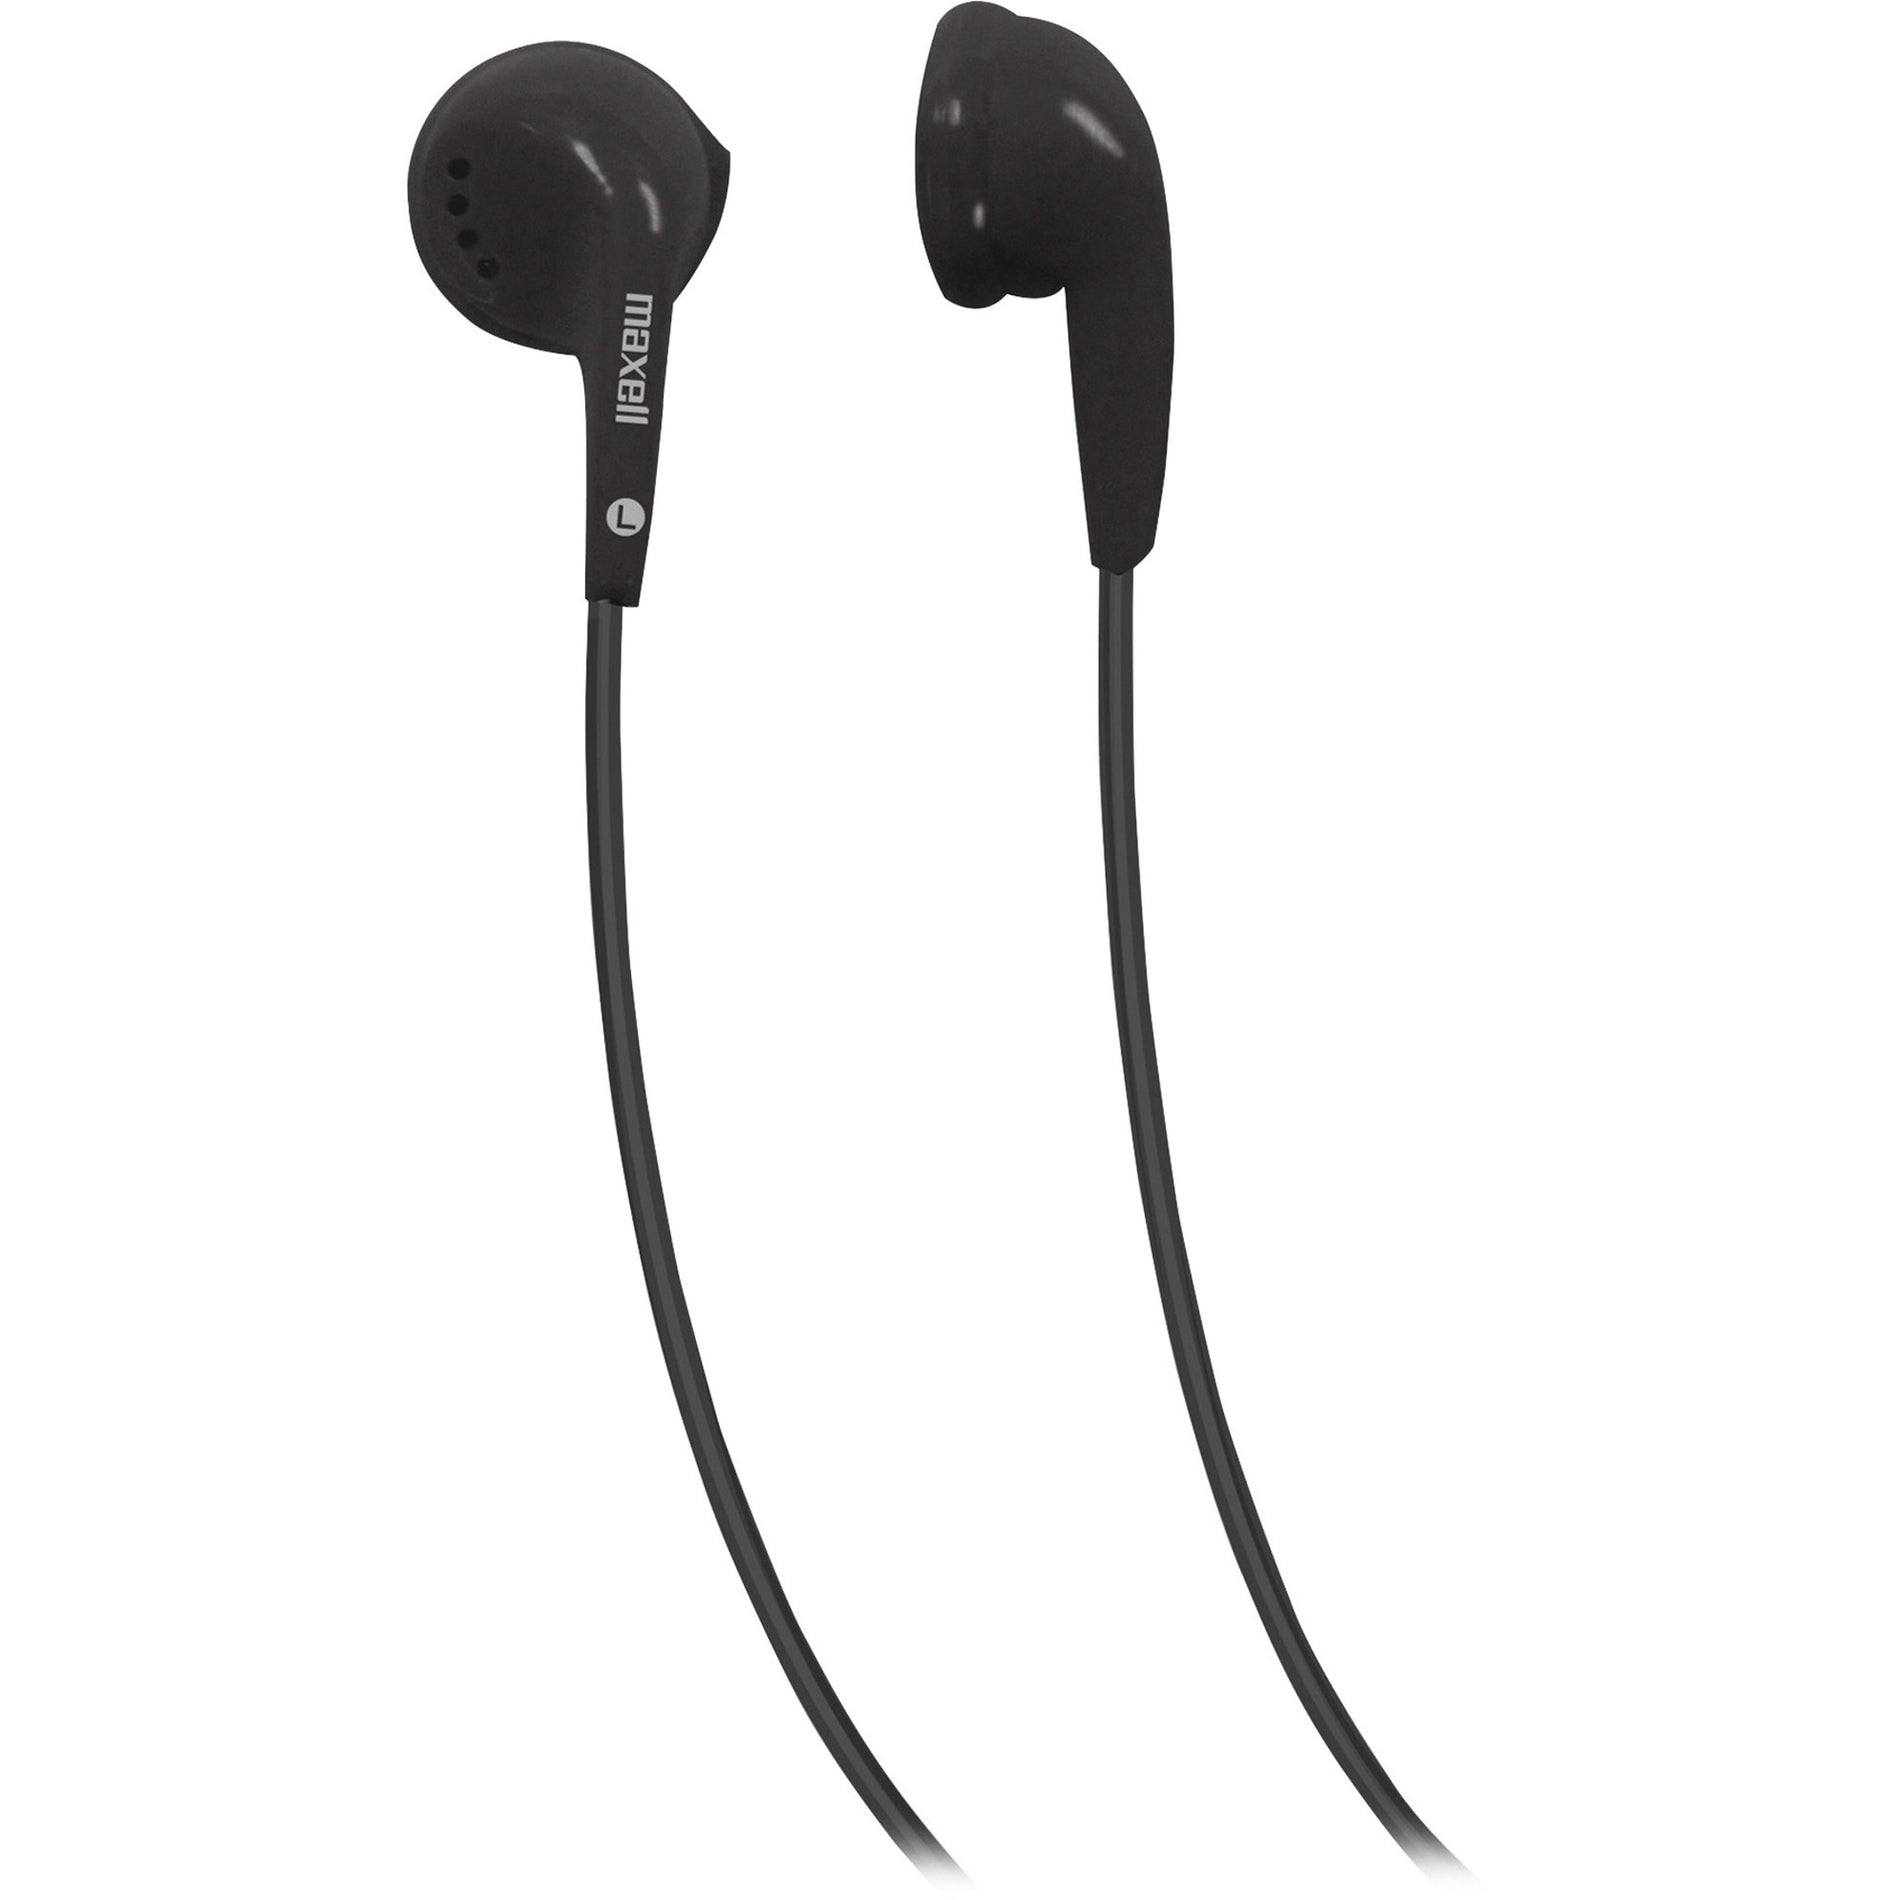 Maxell 190560 EB-95 Stereo Earbuds, Lightweight, Black